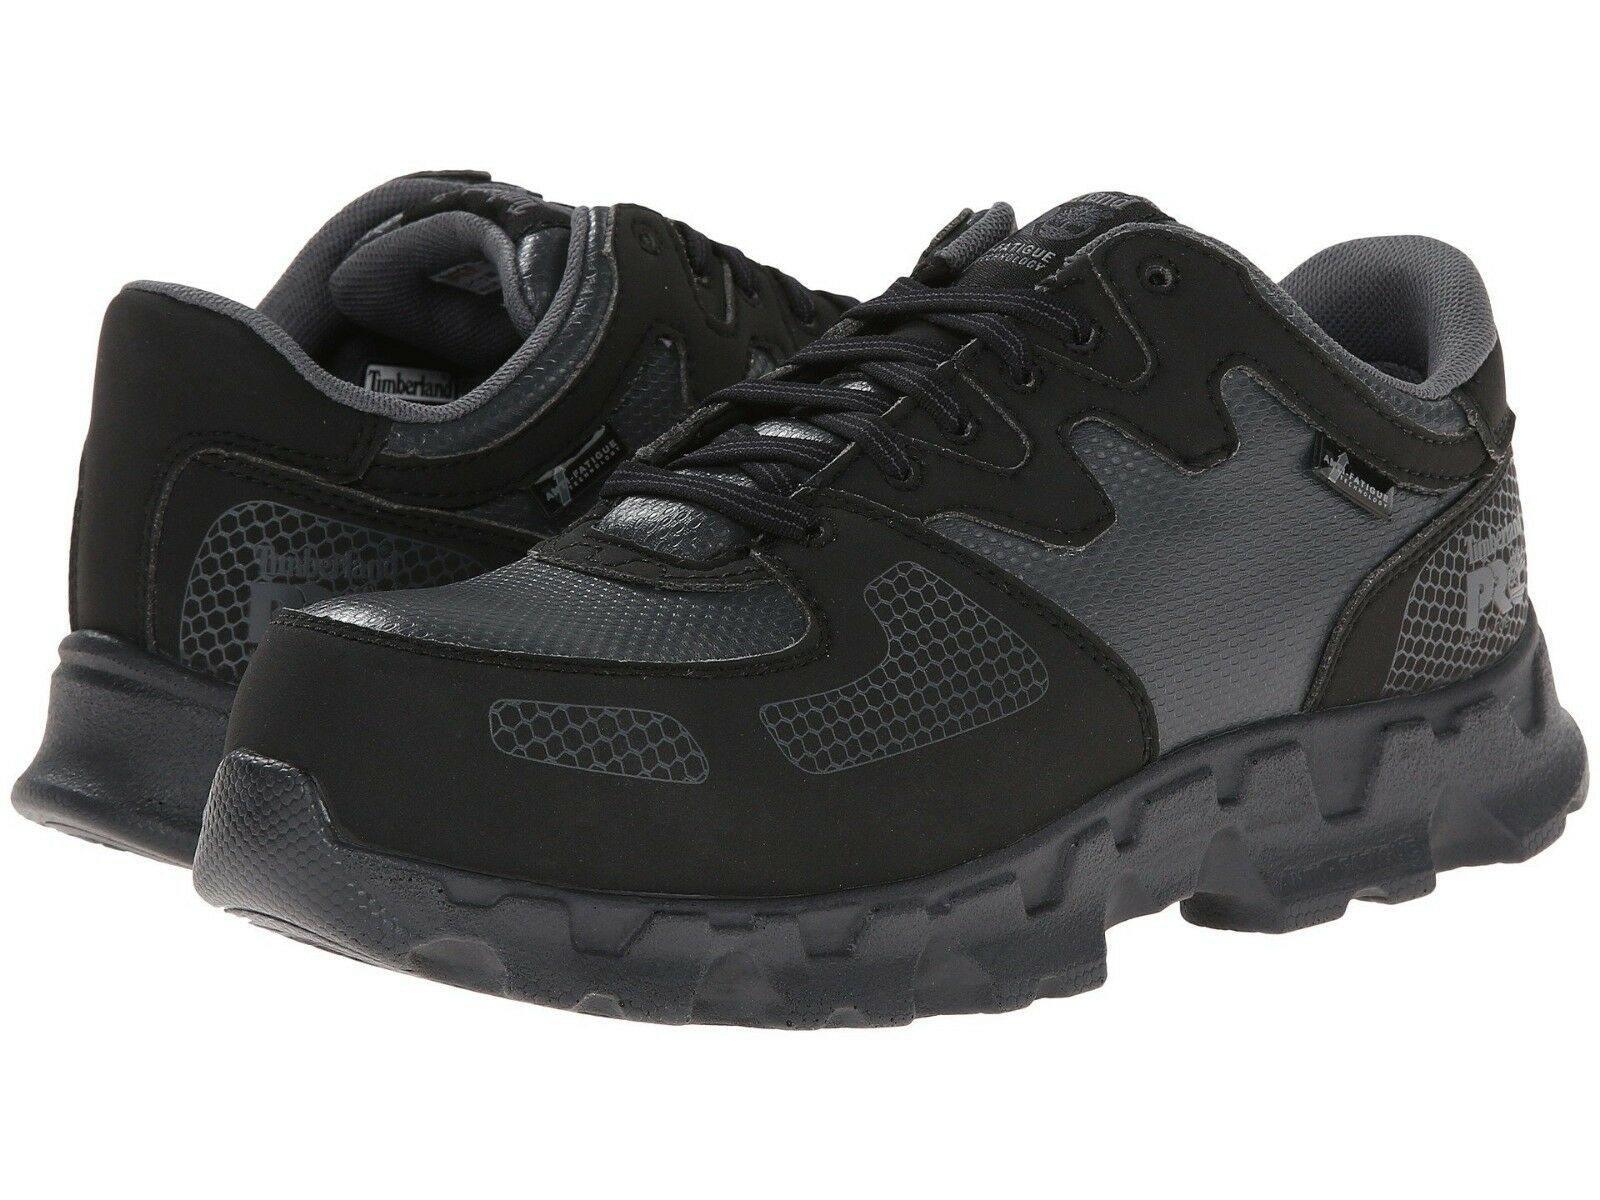 Timberland-PRO-Powertrain Women's Alloy Safety Toe ESD SD Work Shoes Size   US 11 W /UK 9/EU 42 - SVNYFancy